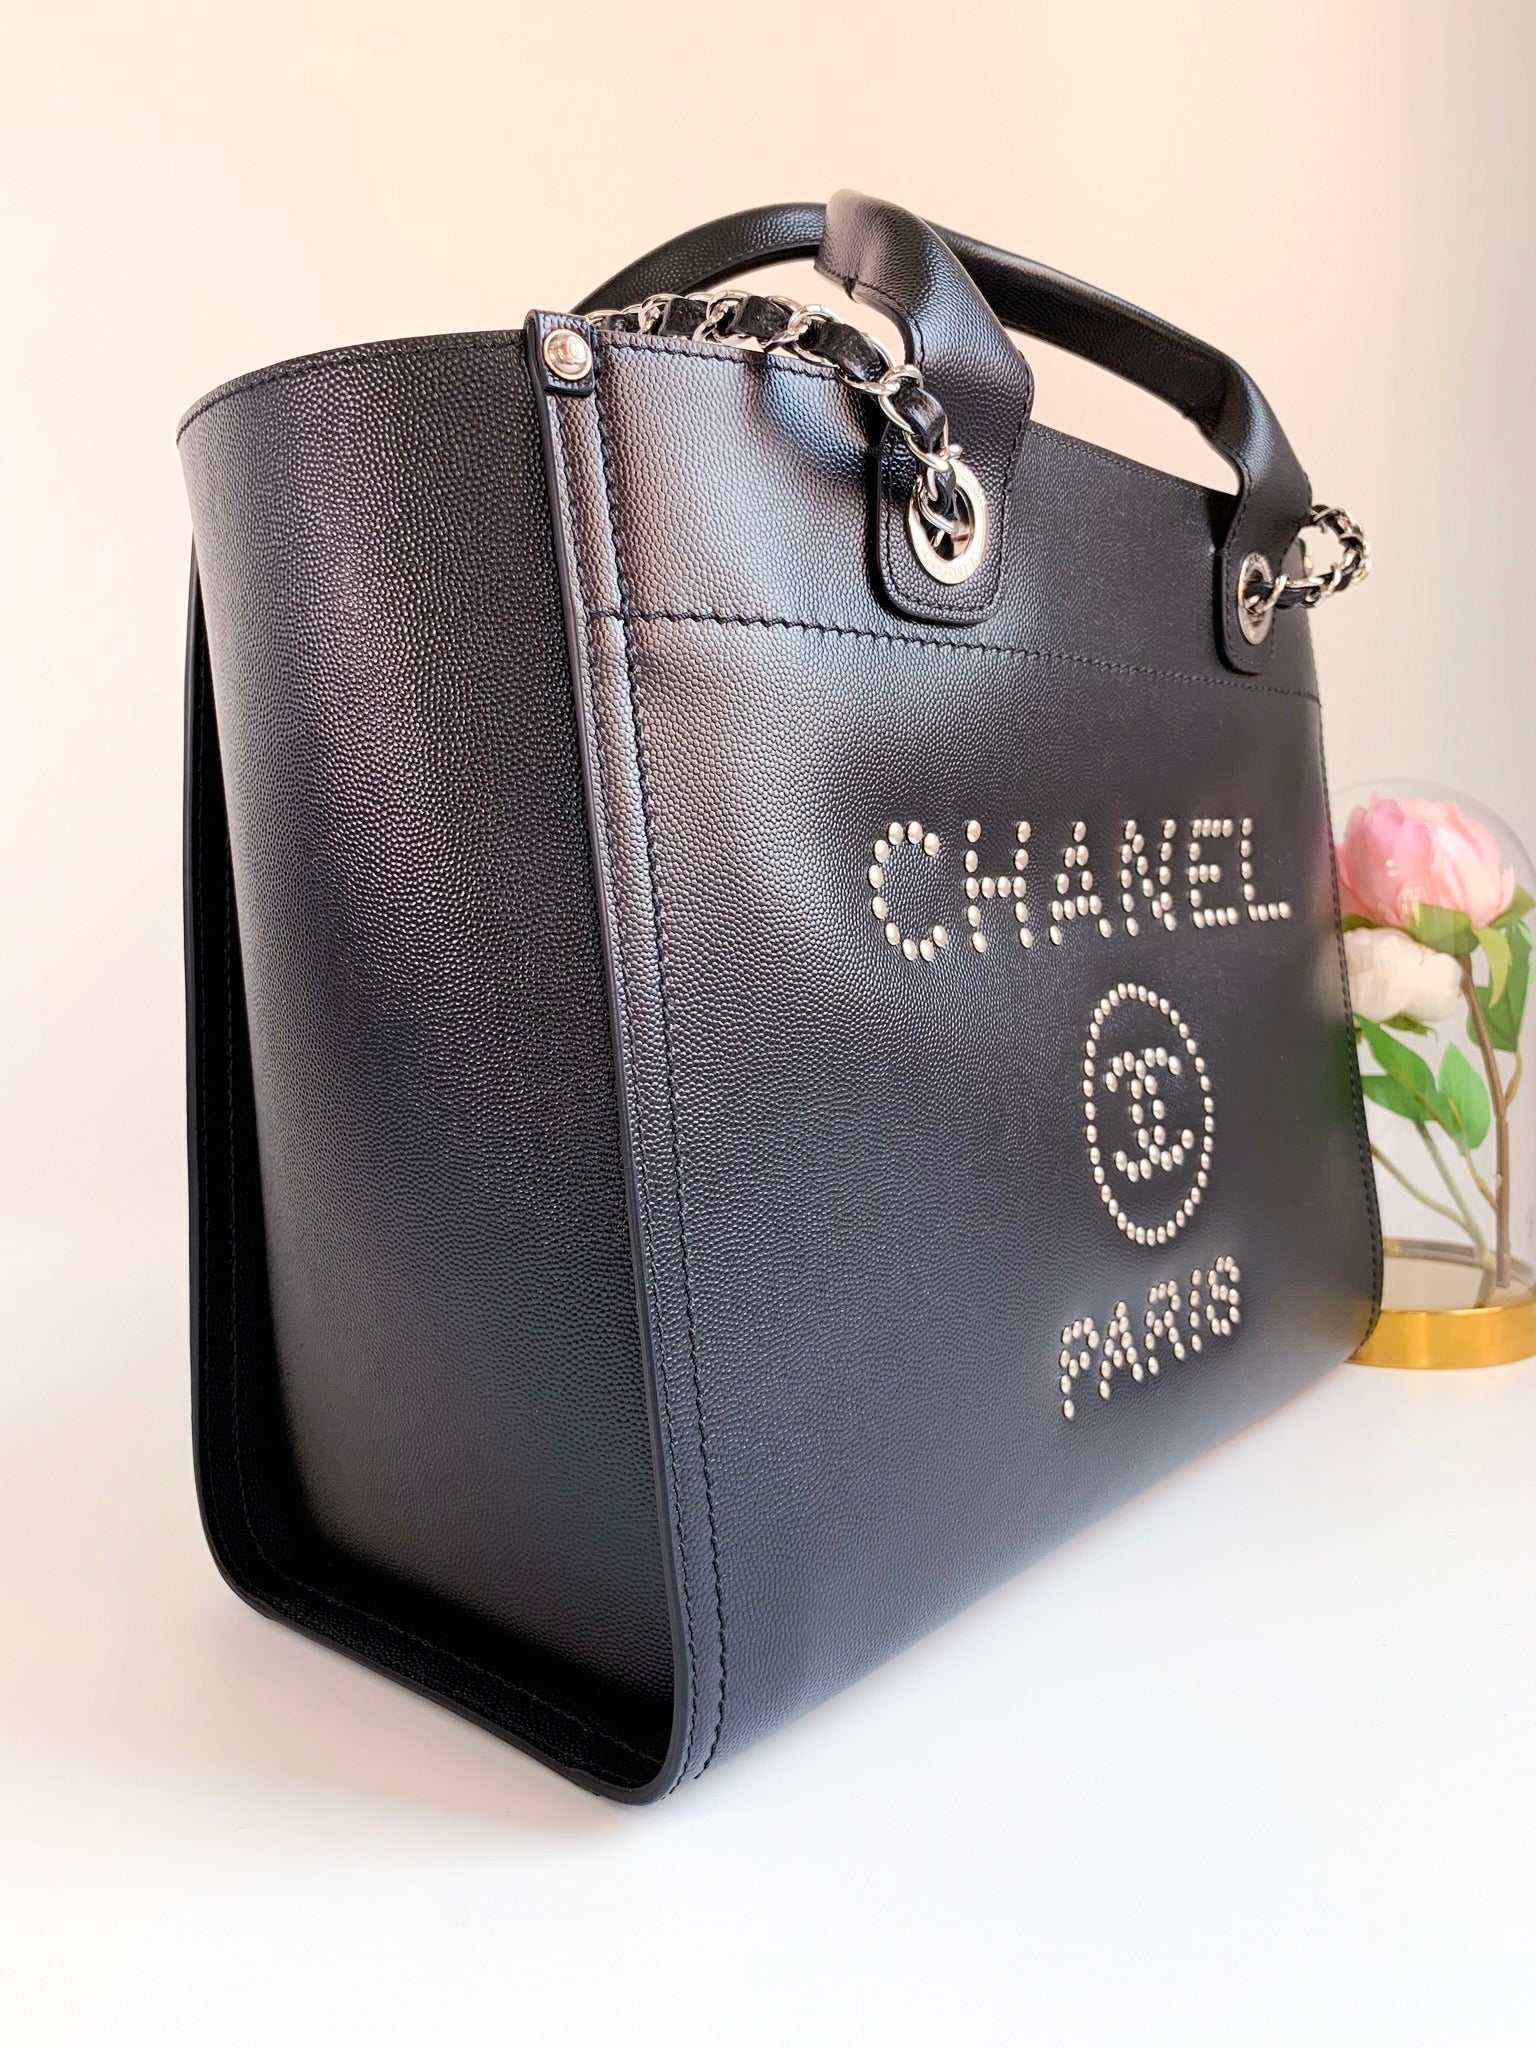 Chanel Navy Blue Glazed Leather Deauville Small Shopping Tote Bag